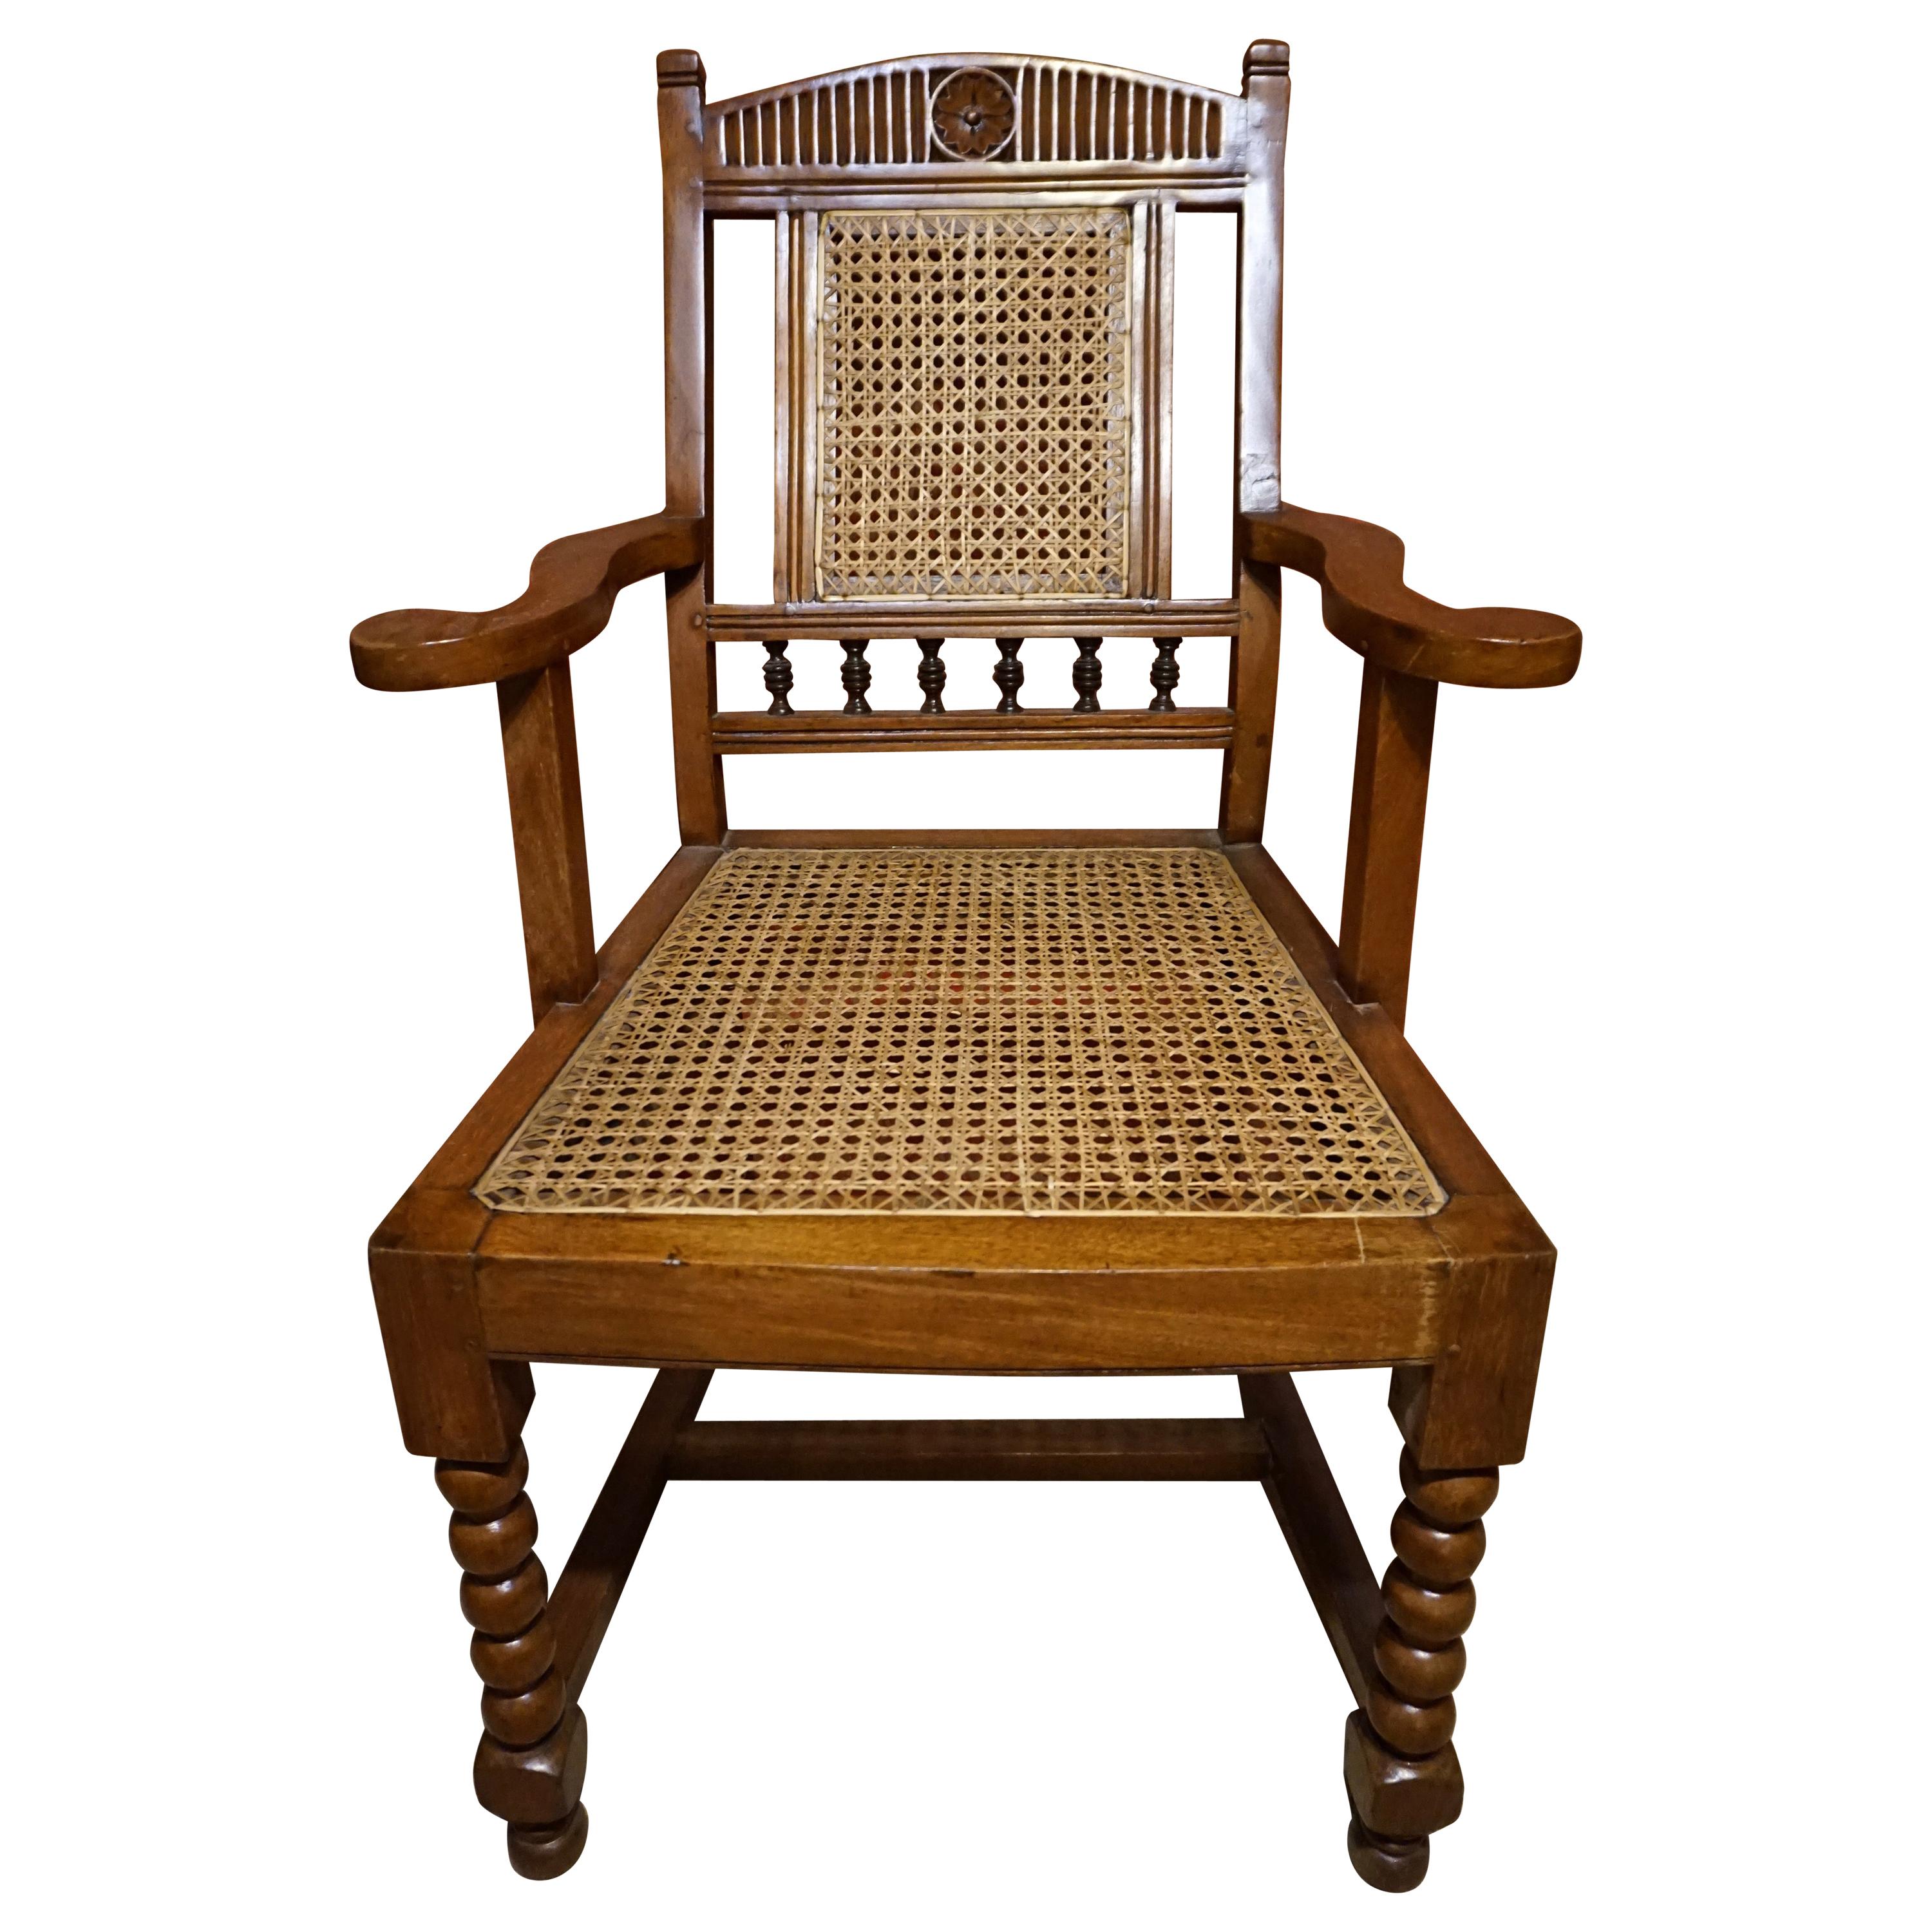 Anglo-Indian Teak Rosewood Cane Armchair With Barley Twist Legs